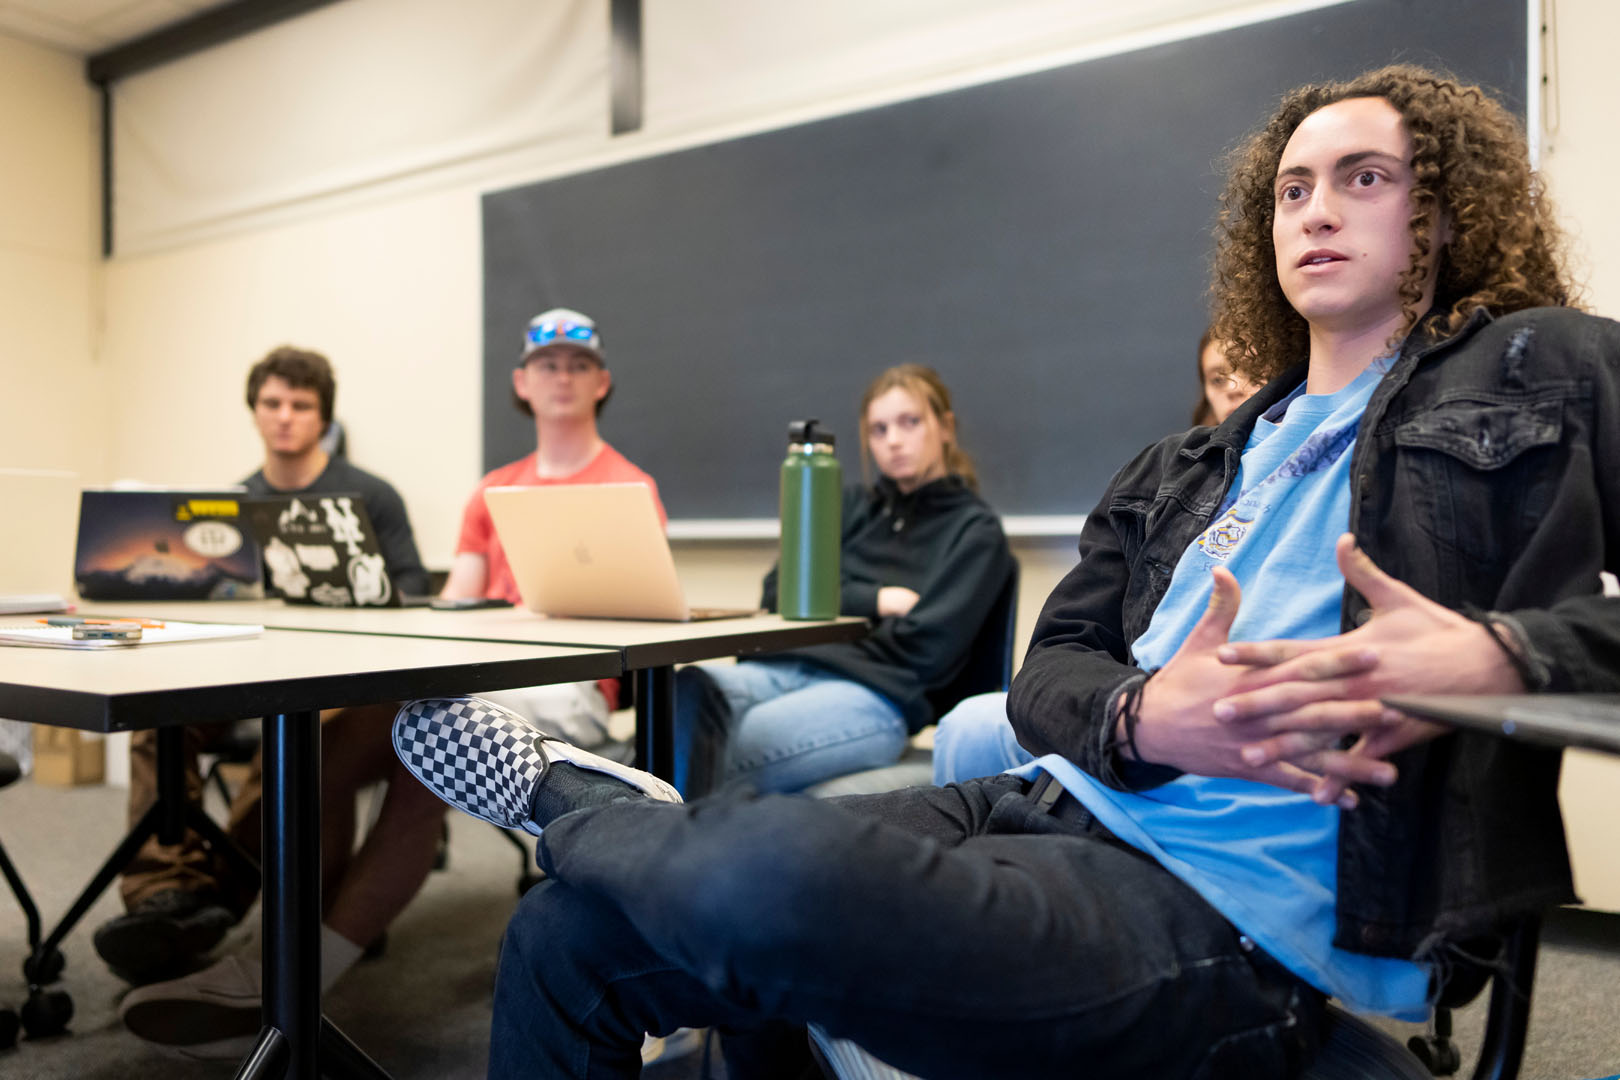 Students participate in a debate on climate policy during Marion Hourdequin's Block 6  Contesting Climate Justice class on March 15, 2023. Photo by Lonnie Timmons III / Colorado College.